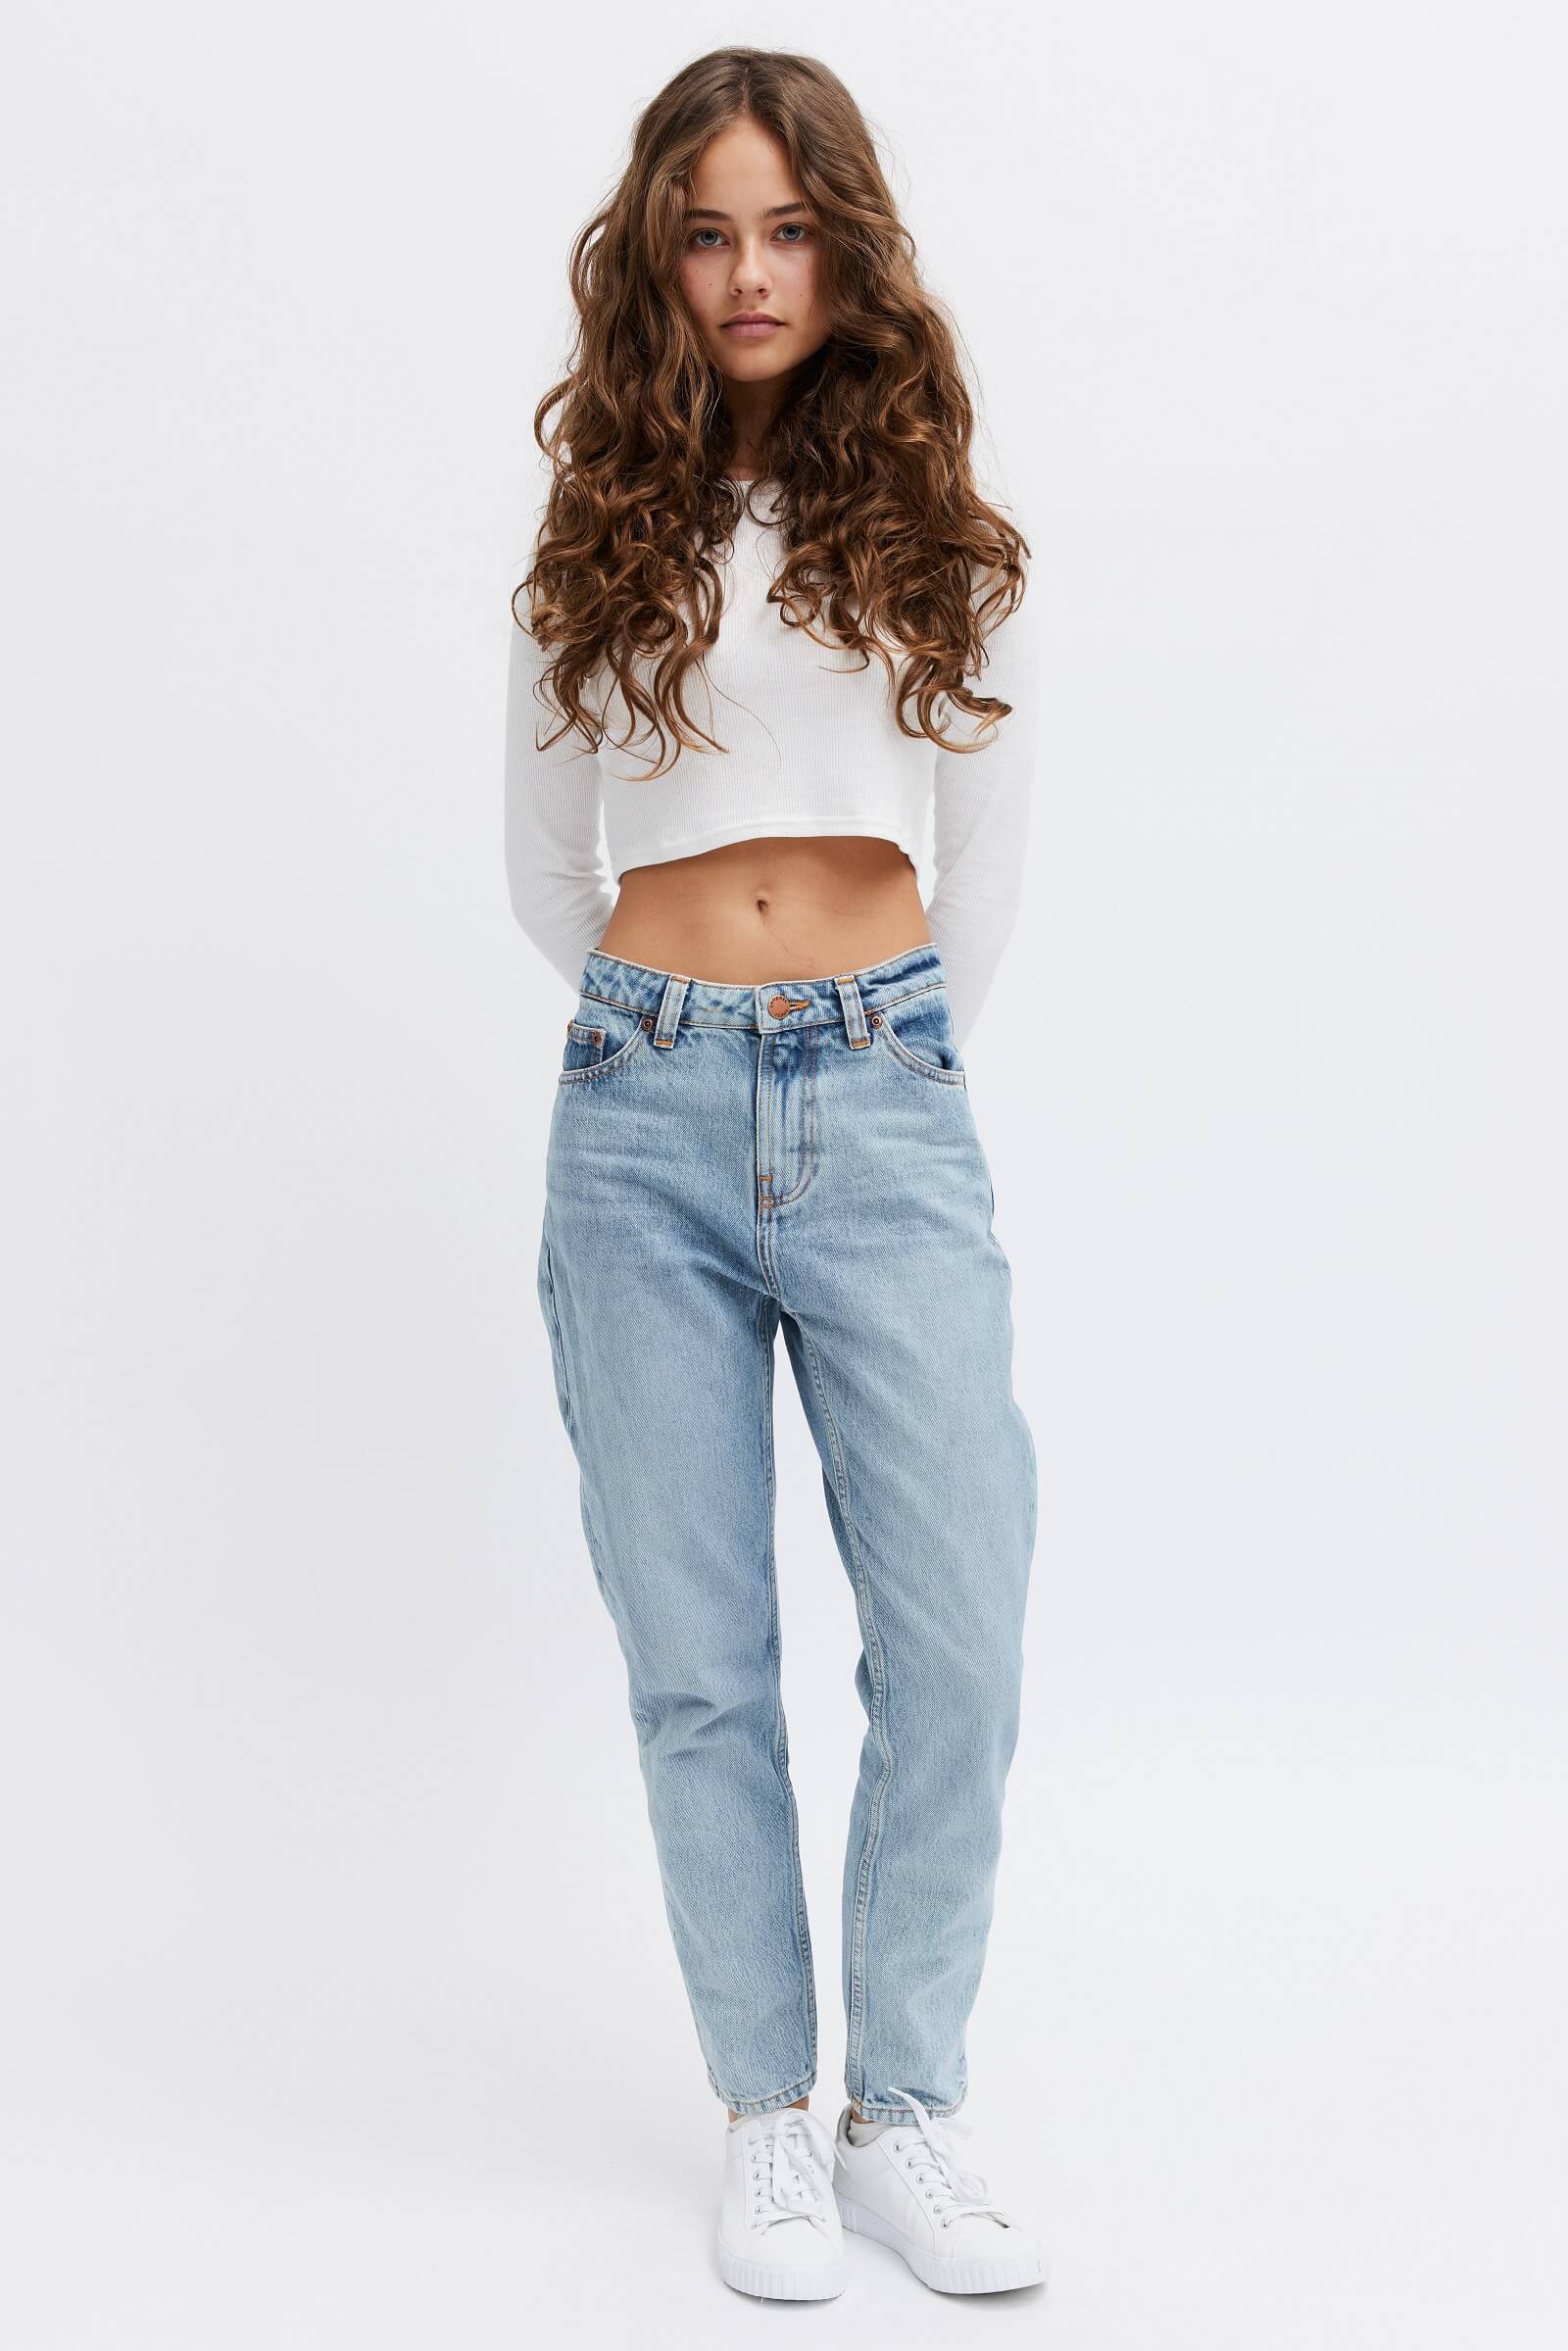 Ethically made jeans for women - Sustainable and eco-friendly fashion